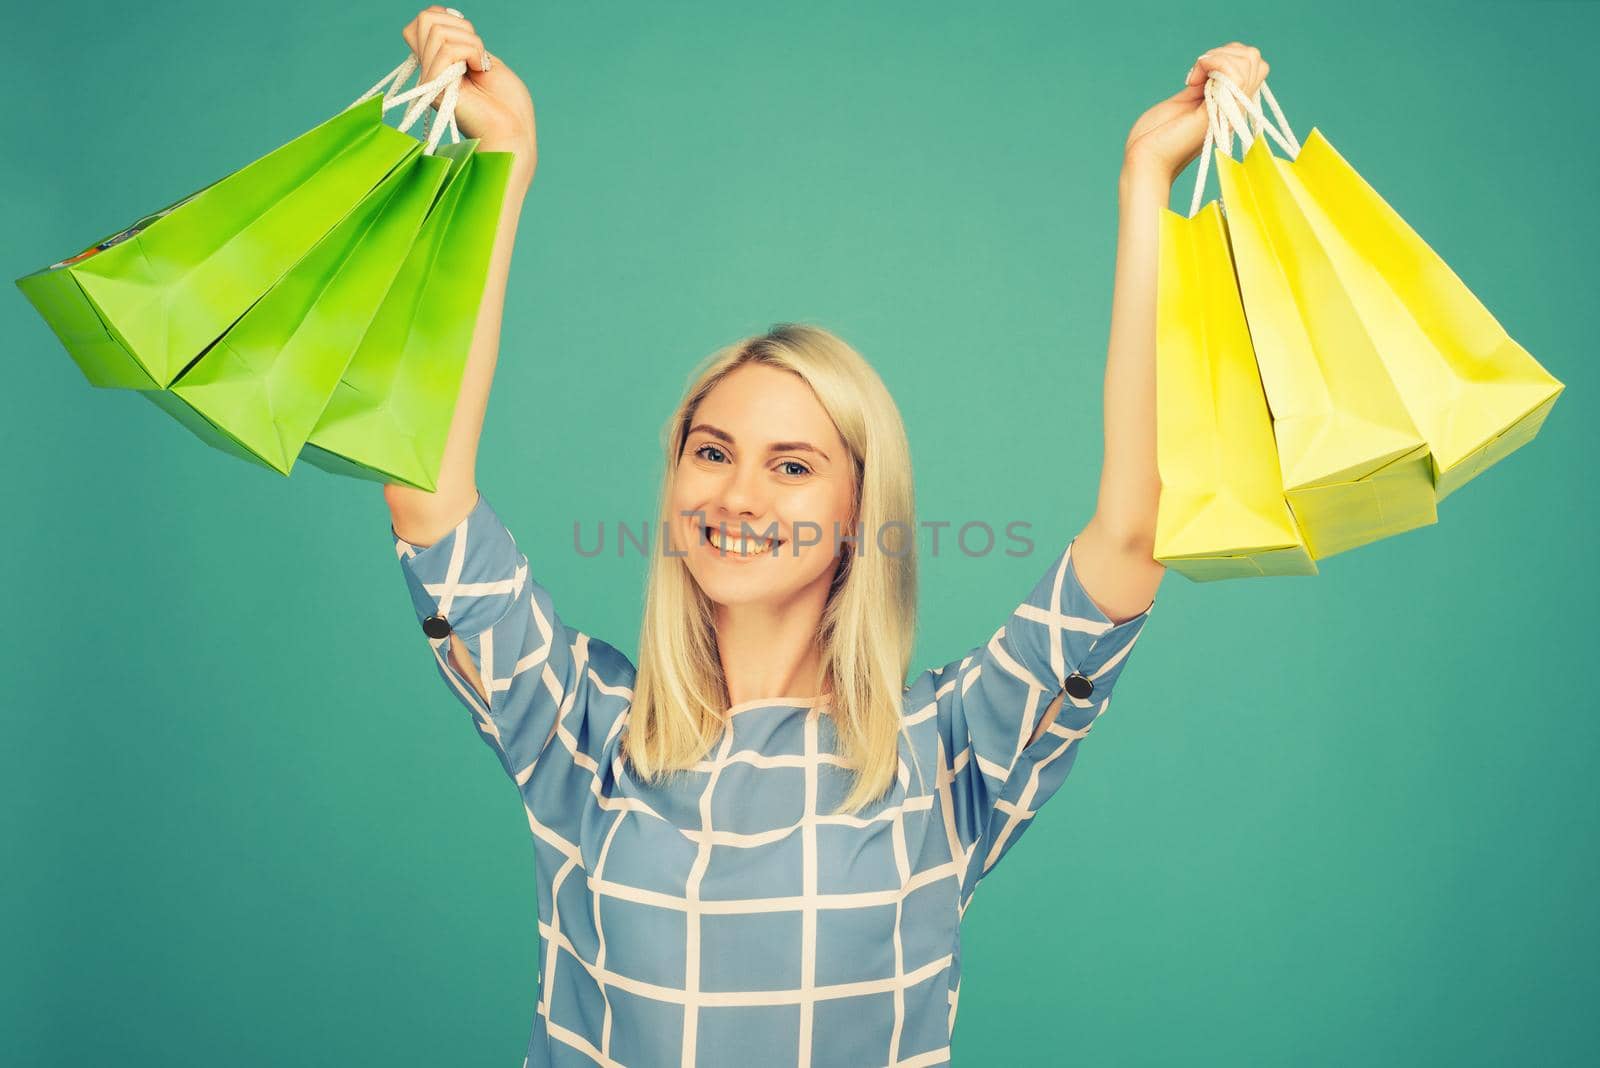 Happy girl in a checkered blouse holds shopping bags by zartarn